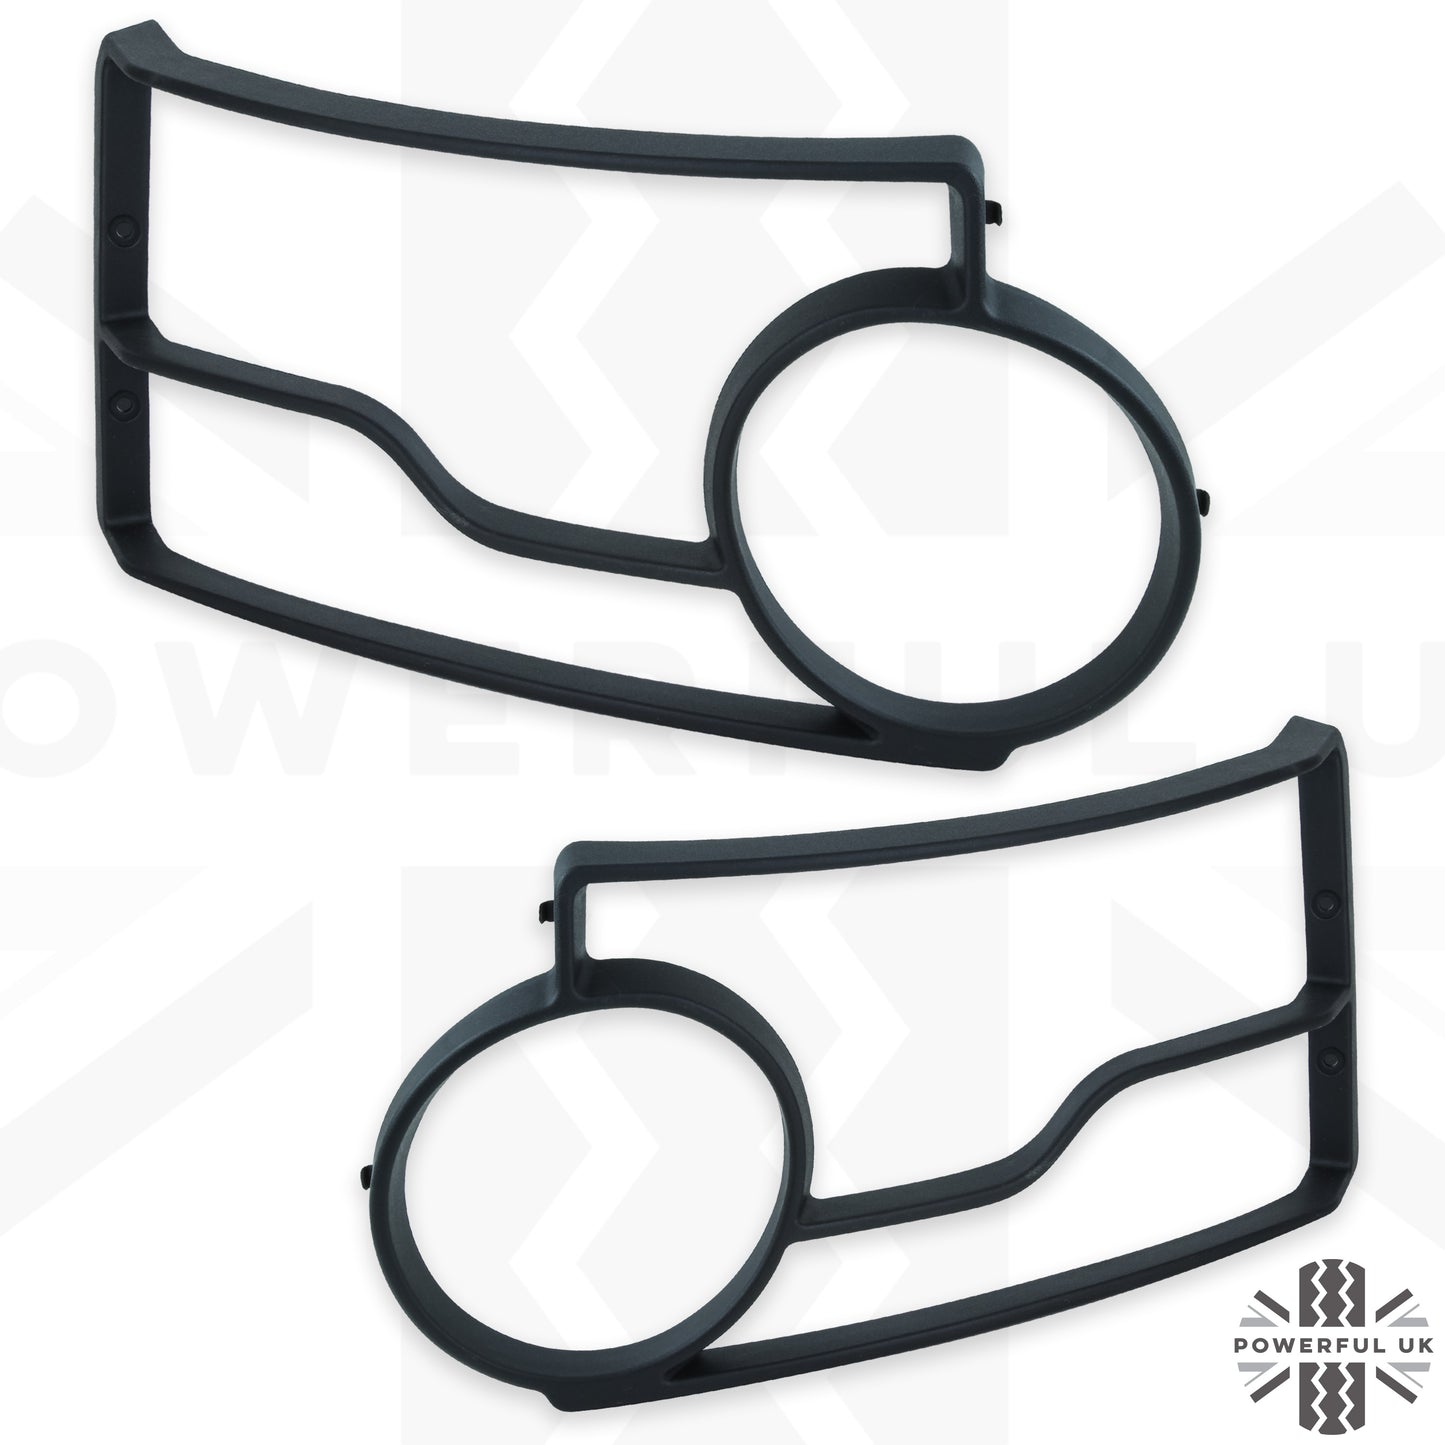 Front Light Guards for Land Rover Discovery 4 2010-13 - Aftermarket